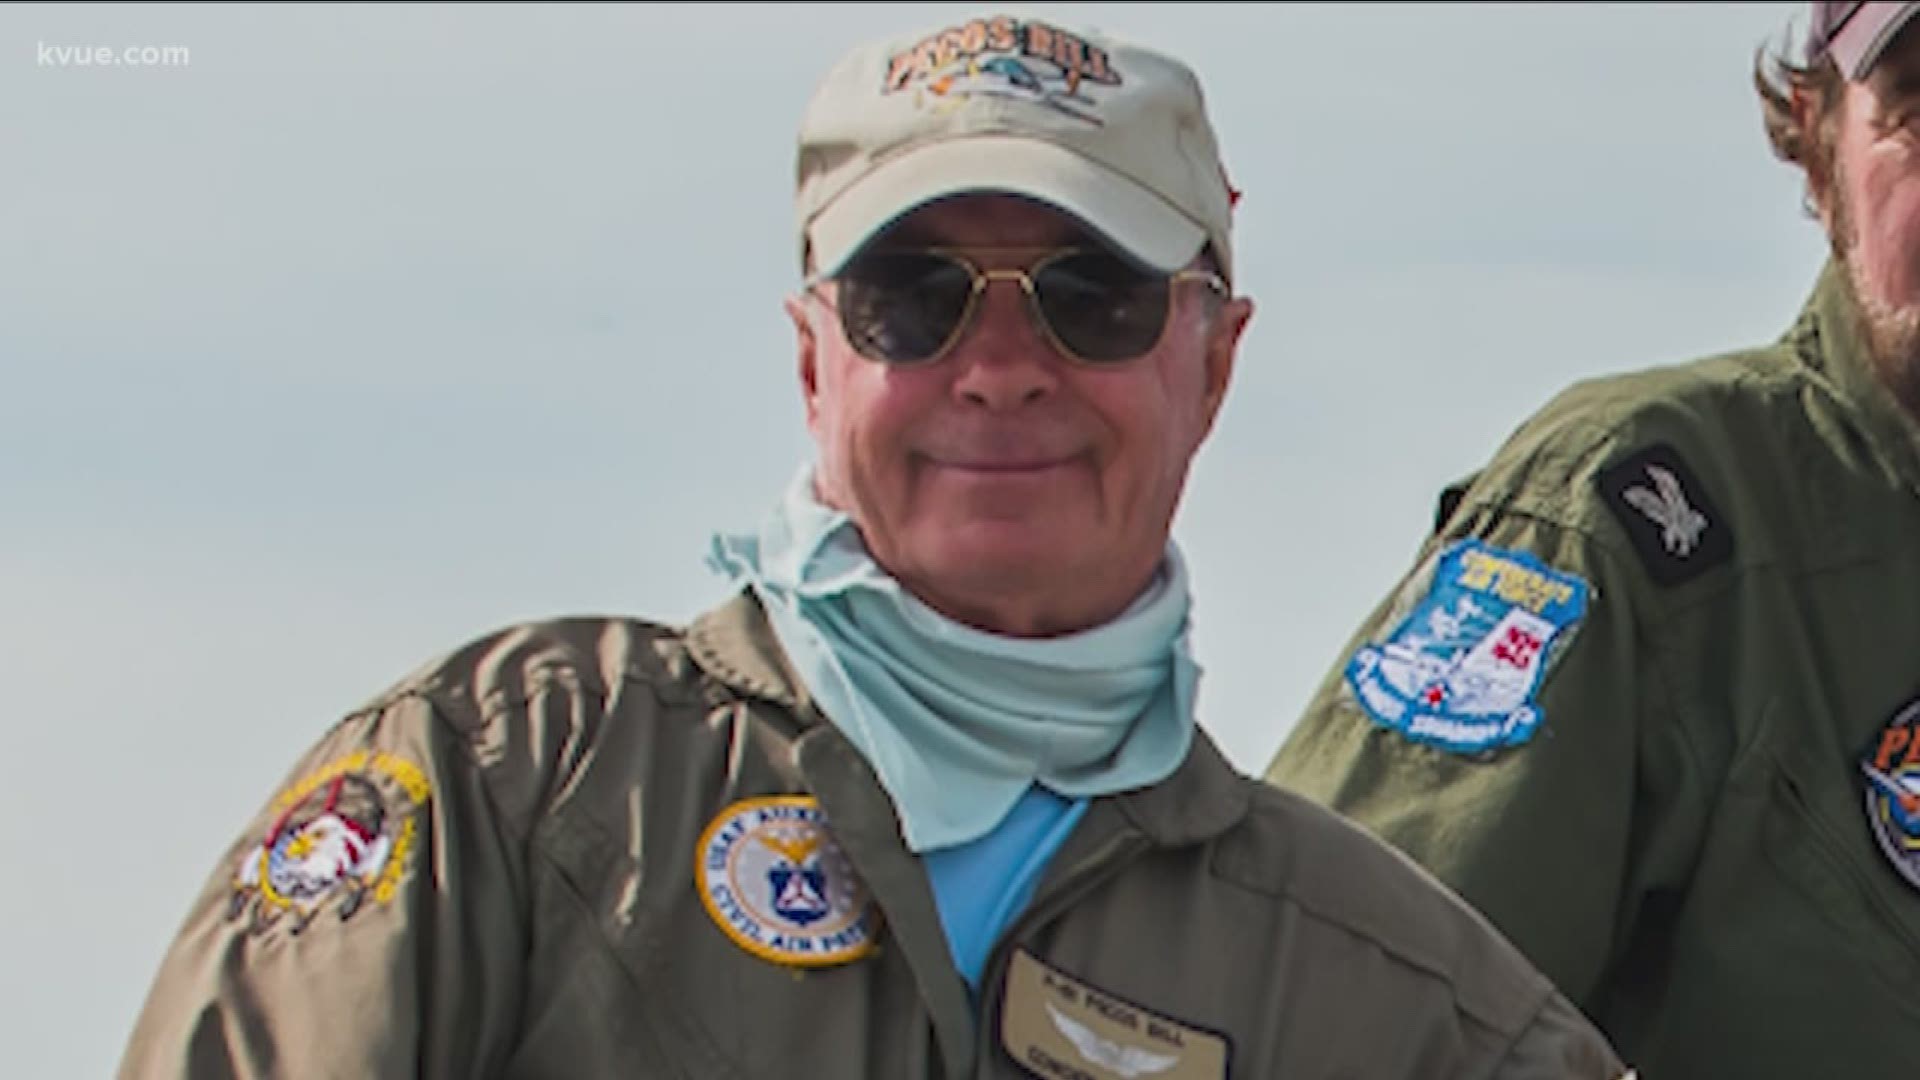 Friends, family and the aviation community in Central Texas are mourning the lass of pilot Cowden Ward Jr.